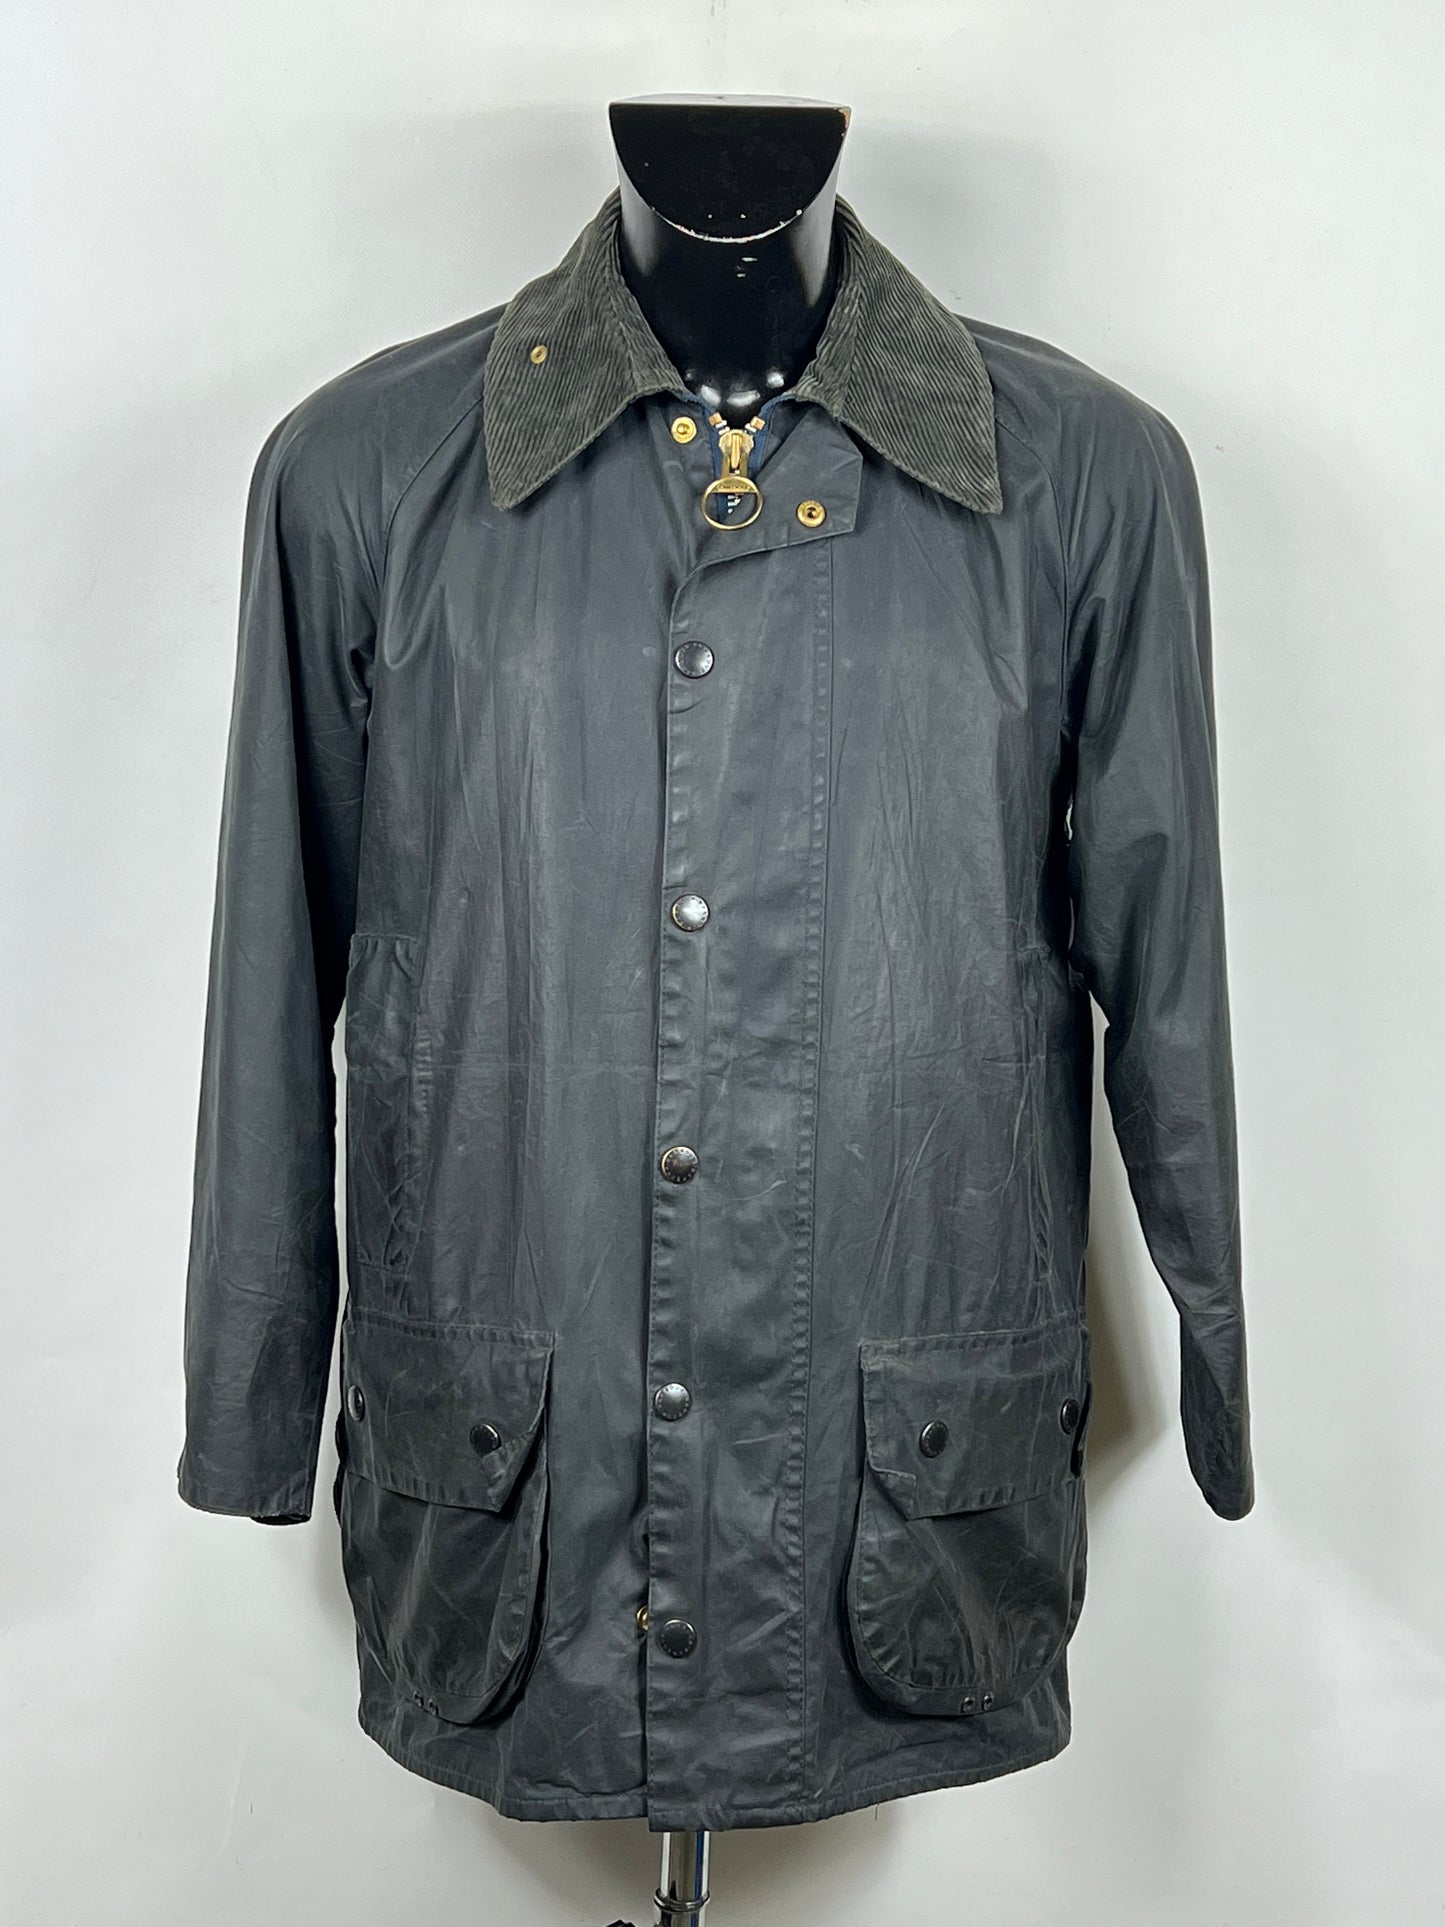 Barbour Giacca Beaufort vintage blu C38/97 cm -Navy waxed Beaufort Jacket Size Small